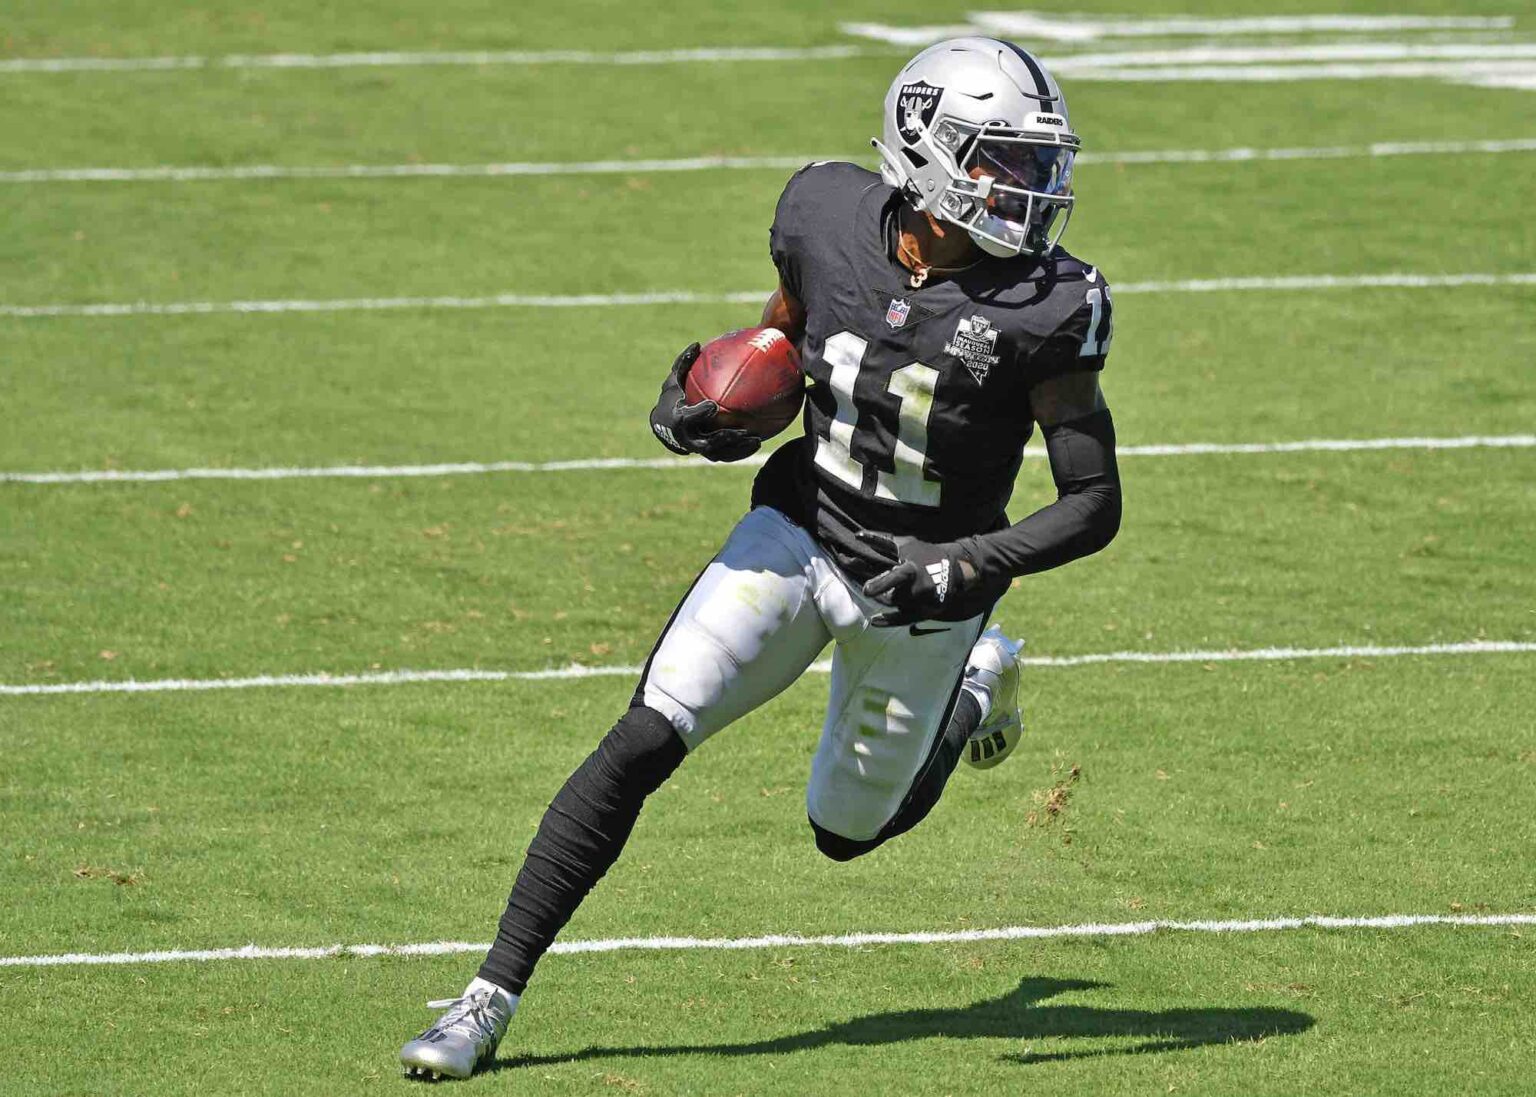 Oakland Raiders' wide receiver Henry Ruggs III has been involved in a fatal car accident while under the influence. Learn what's next for the football star.